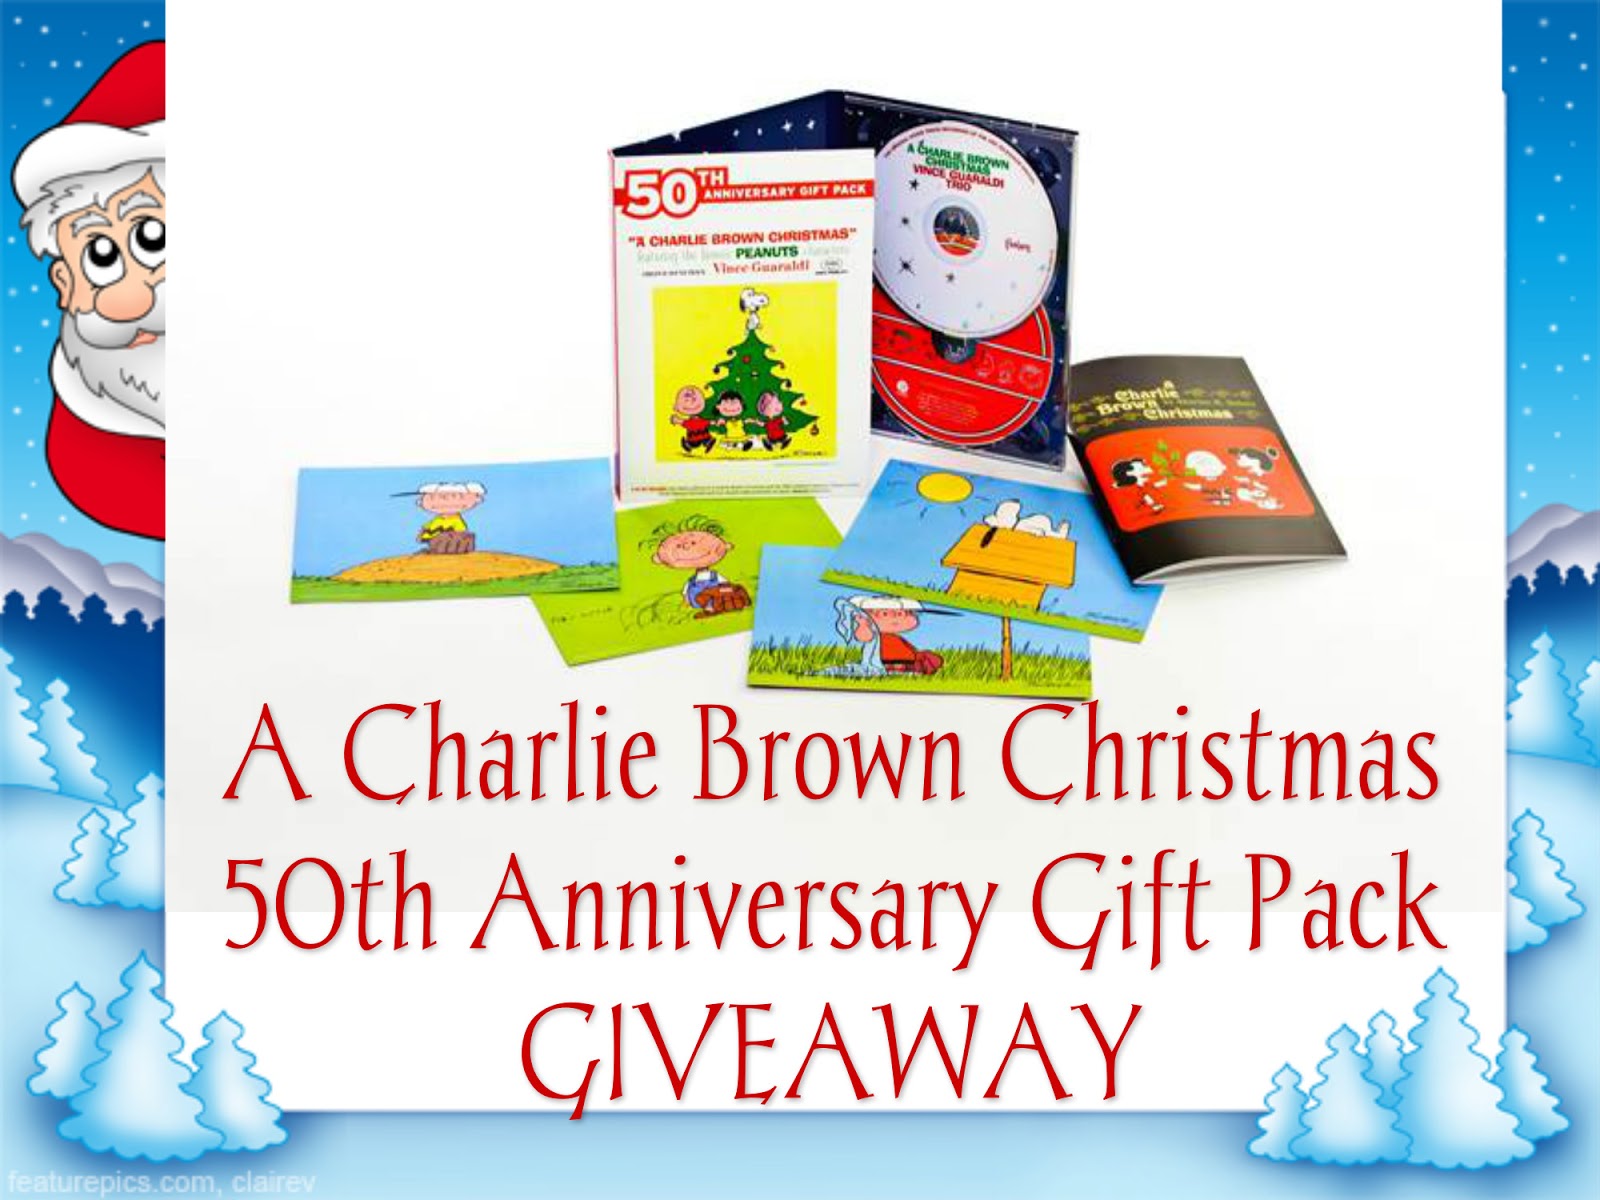 A brand new 50th Anniversary t pack for A Charlie Brown Christmas has just hit stores This deluxe package is exclusive to Walmart and consists of 2 CDs